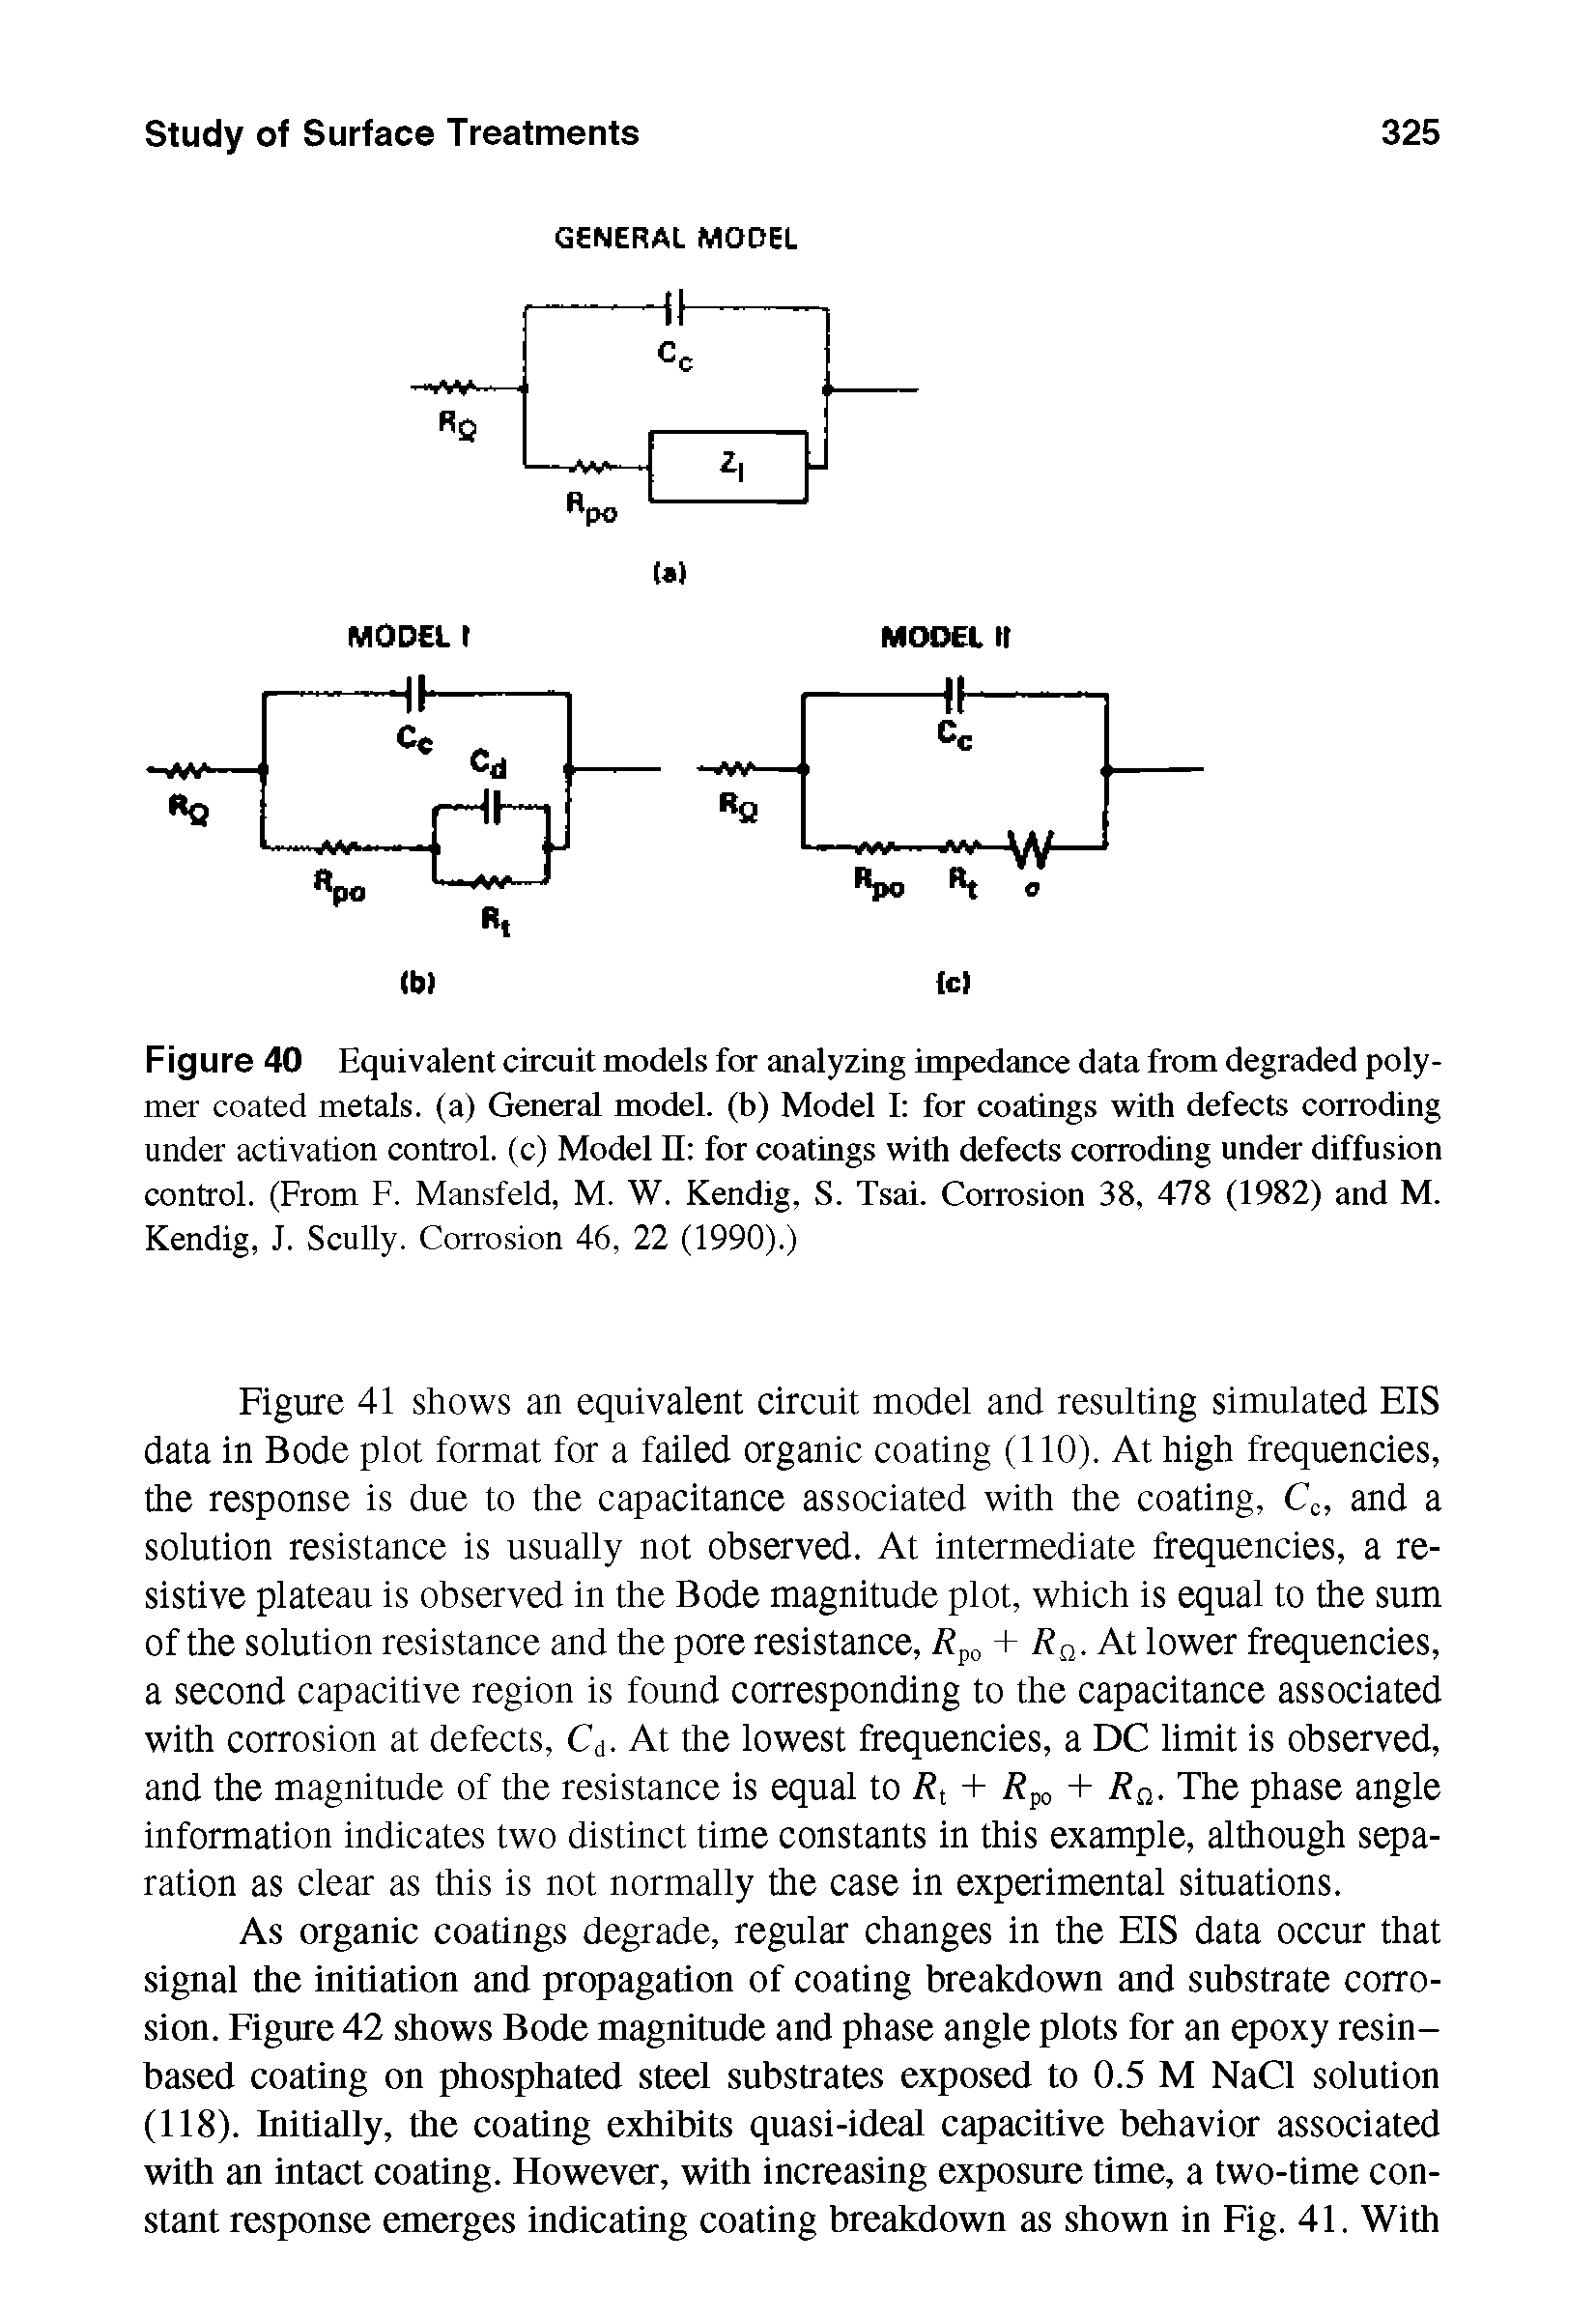 Figure 40 Equivalent circuit models for analyzing impedance data from degraded polymer coated metals, (a) General model, (b) Model I for coatings with defects corroding under activation control, (c) Model II for coatings with defects corroding under diffusion control. (From F. Mansfeld, M. W. Kendig, S. Tsai. Corrosion 38, 478 (1982) and M. Kendig, J. Scully. Corrosion 46, 22 (1990).)...